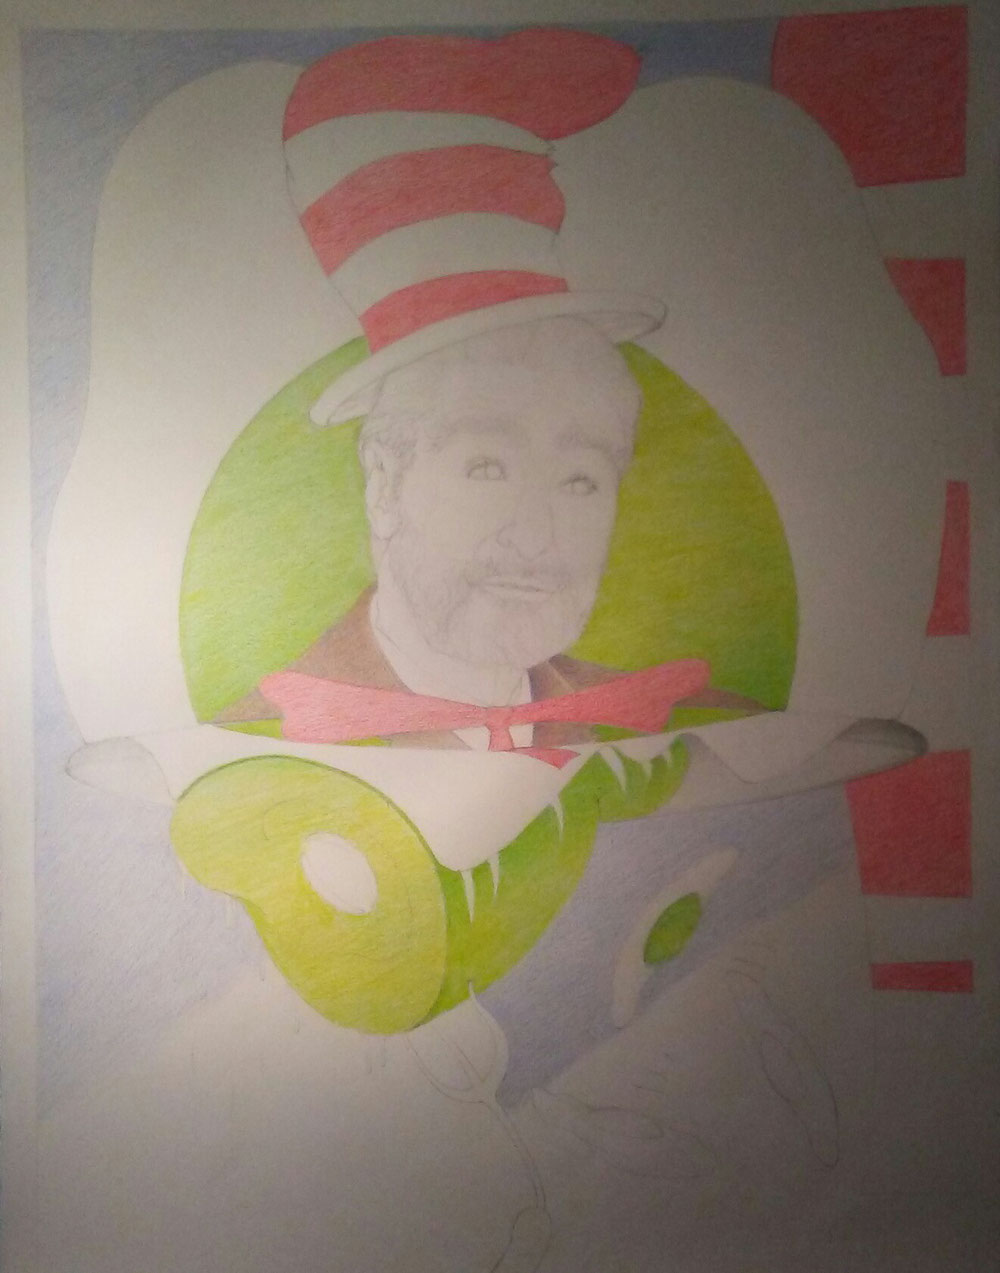 ©️2020 The Cool Cat in the Hat ~ Dr. Seuss 'Egged On'...This is an 18"x 24" watercolor pencil painted illustration that I've designed and drawn in honor of the most 'uniquely' popular children's book writer of all time to me~